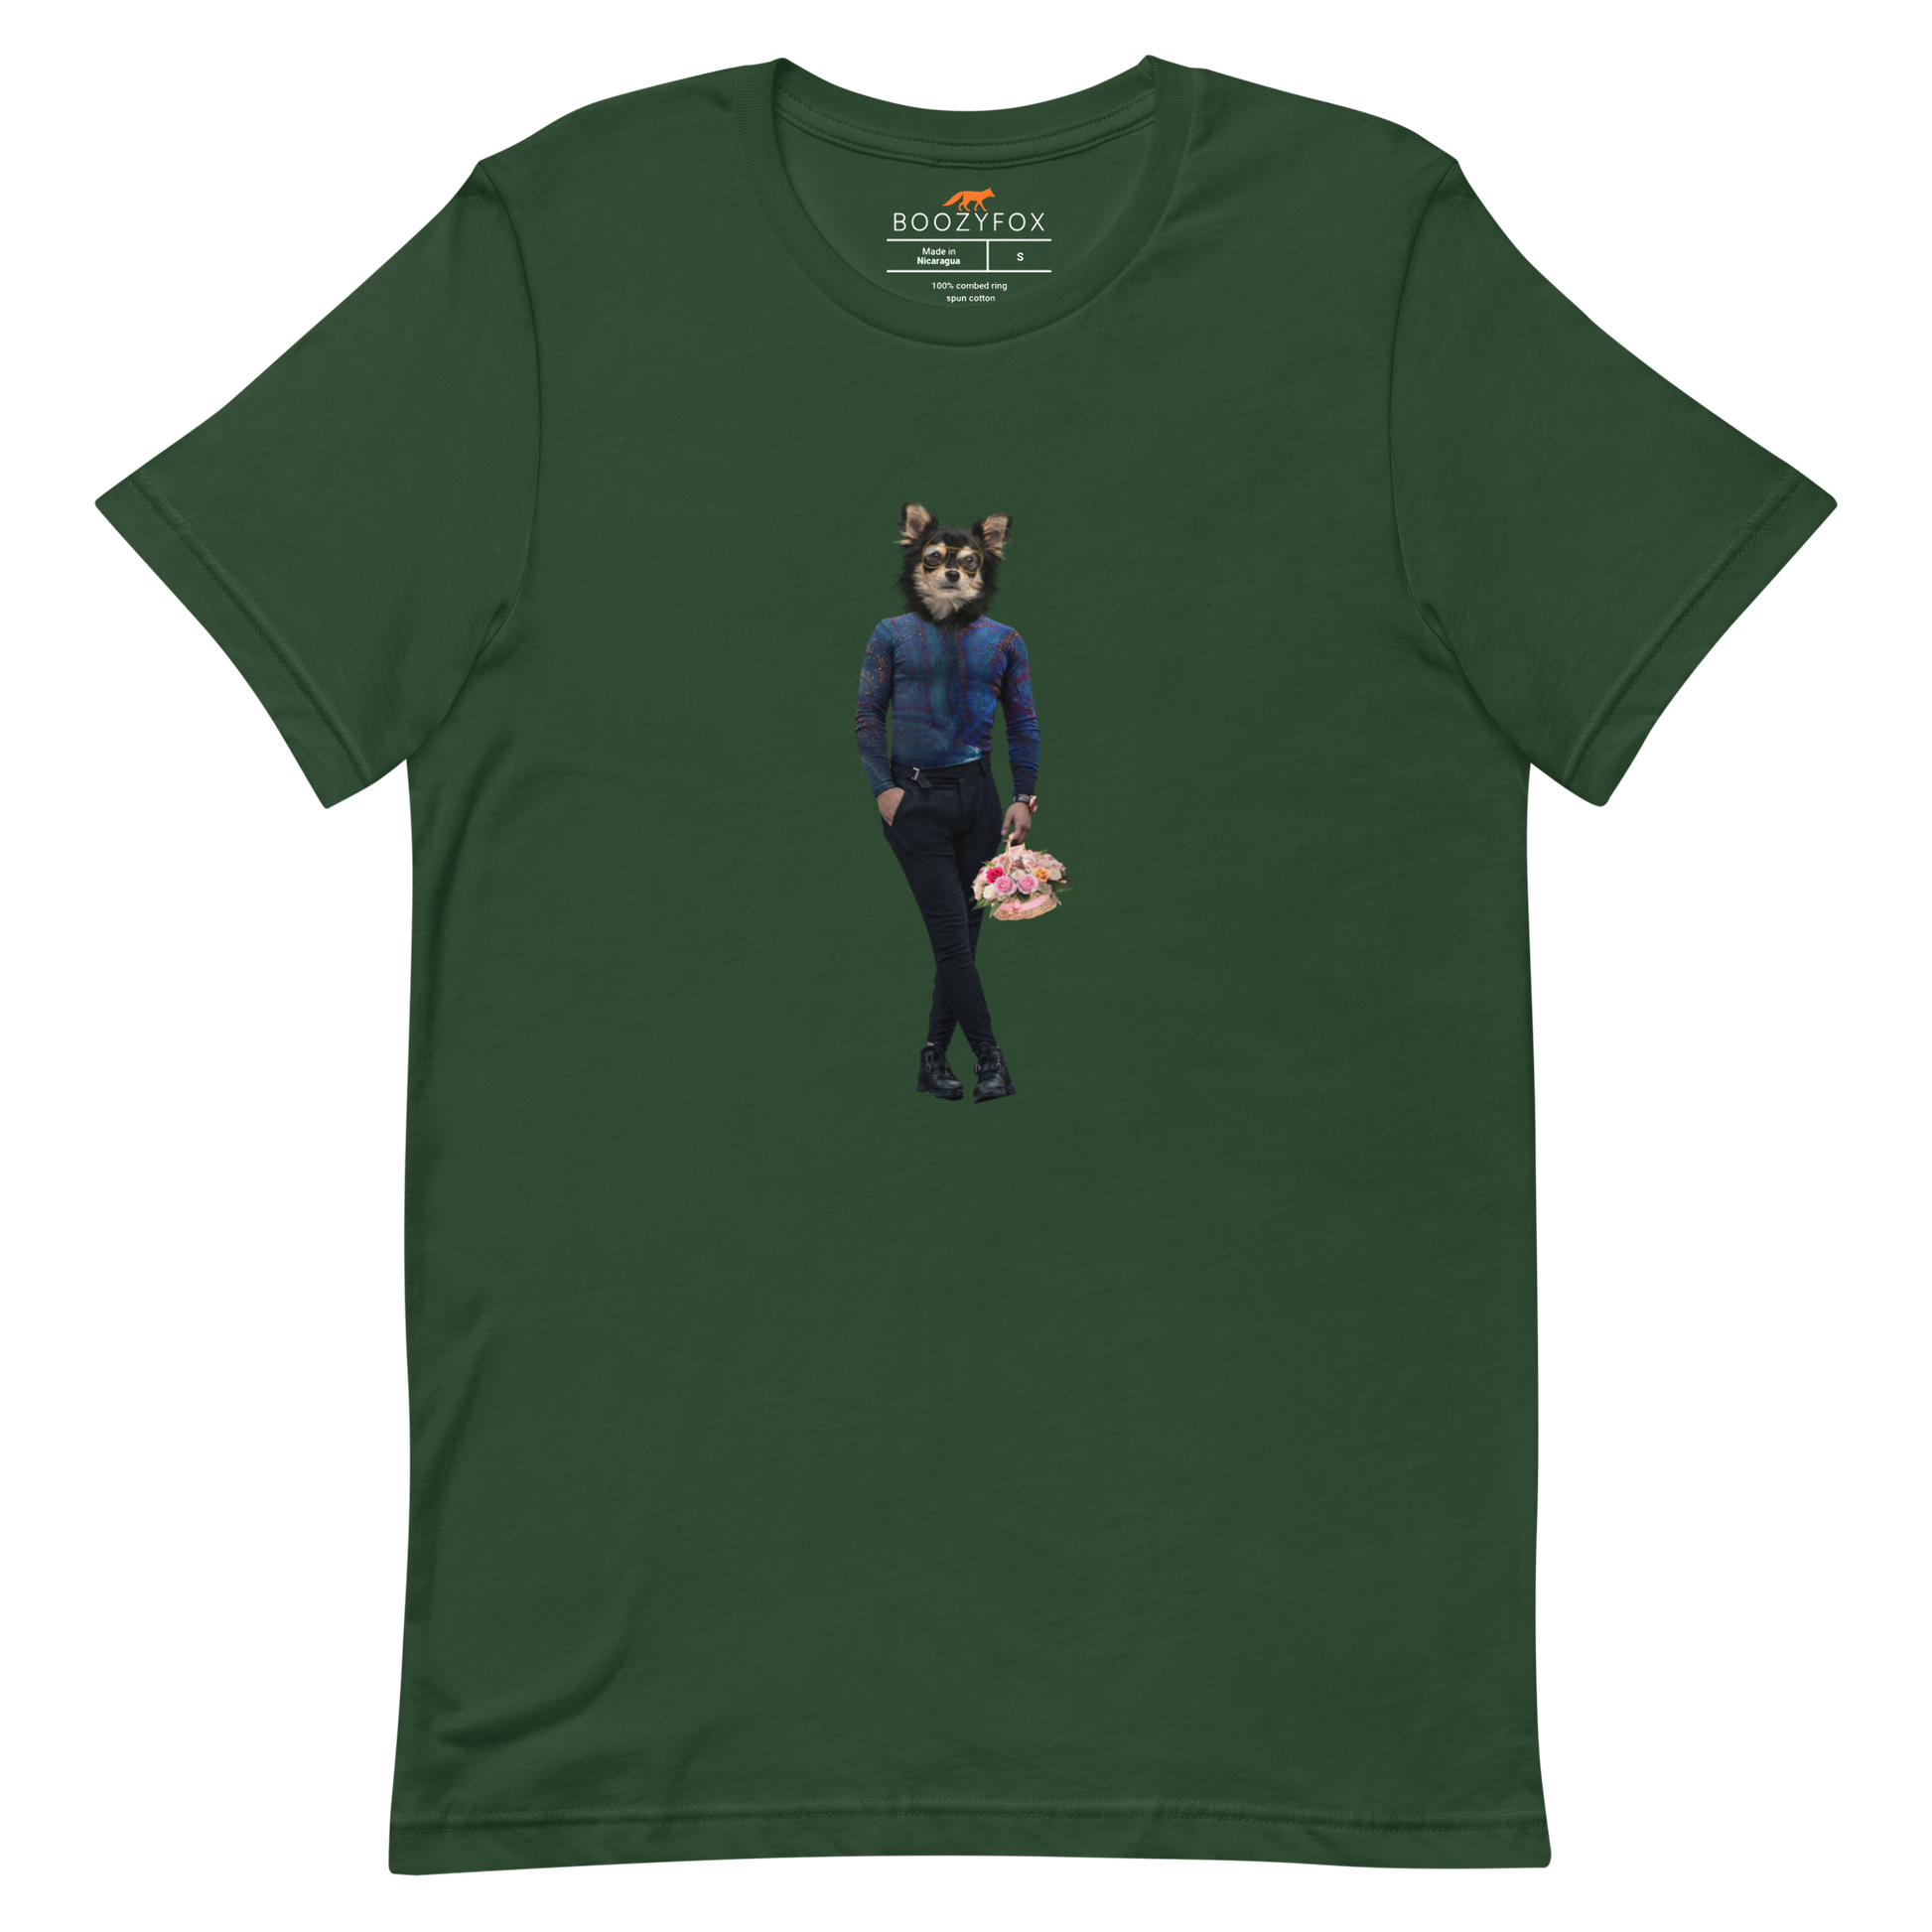 Forest Green Premium Dog T-Shirt featuring an Anthropomorphic Dog graphic on the chest - Funny Graphic Dog Tees - Boozy Fox